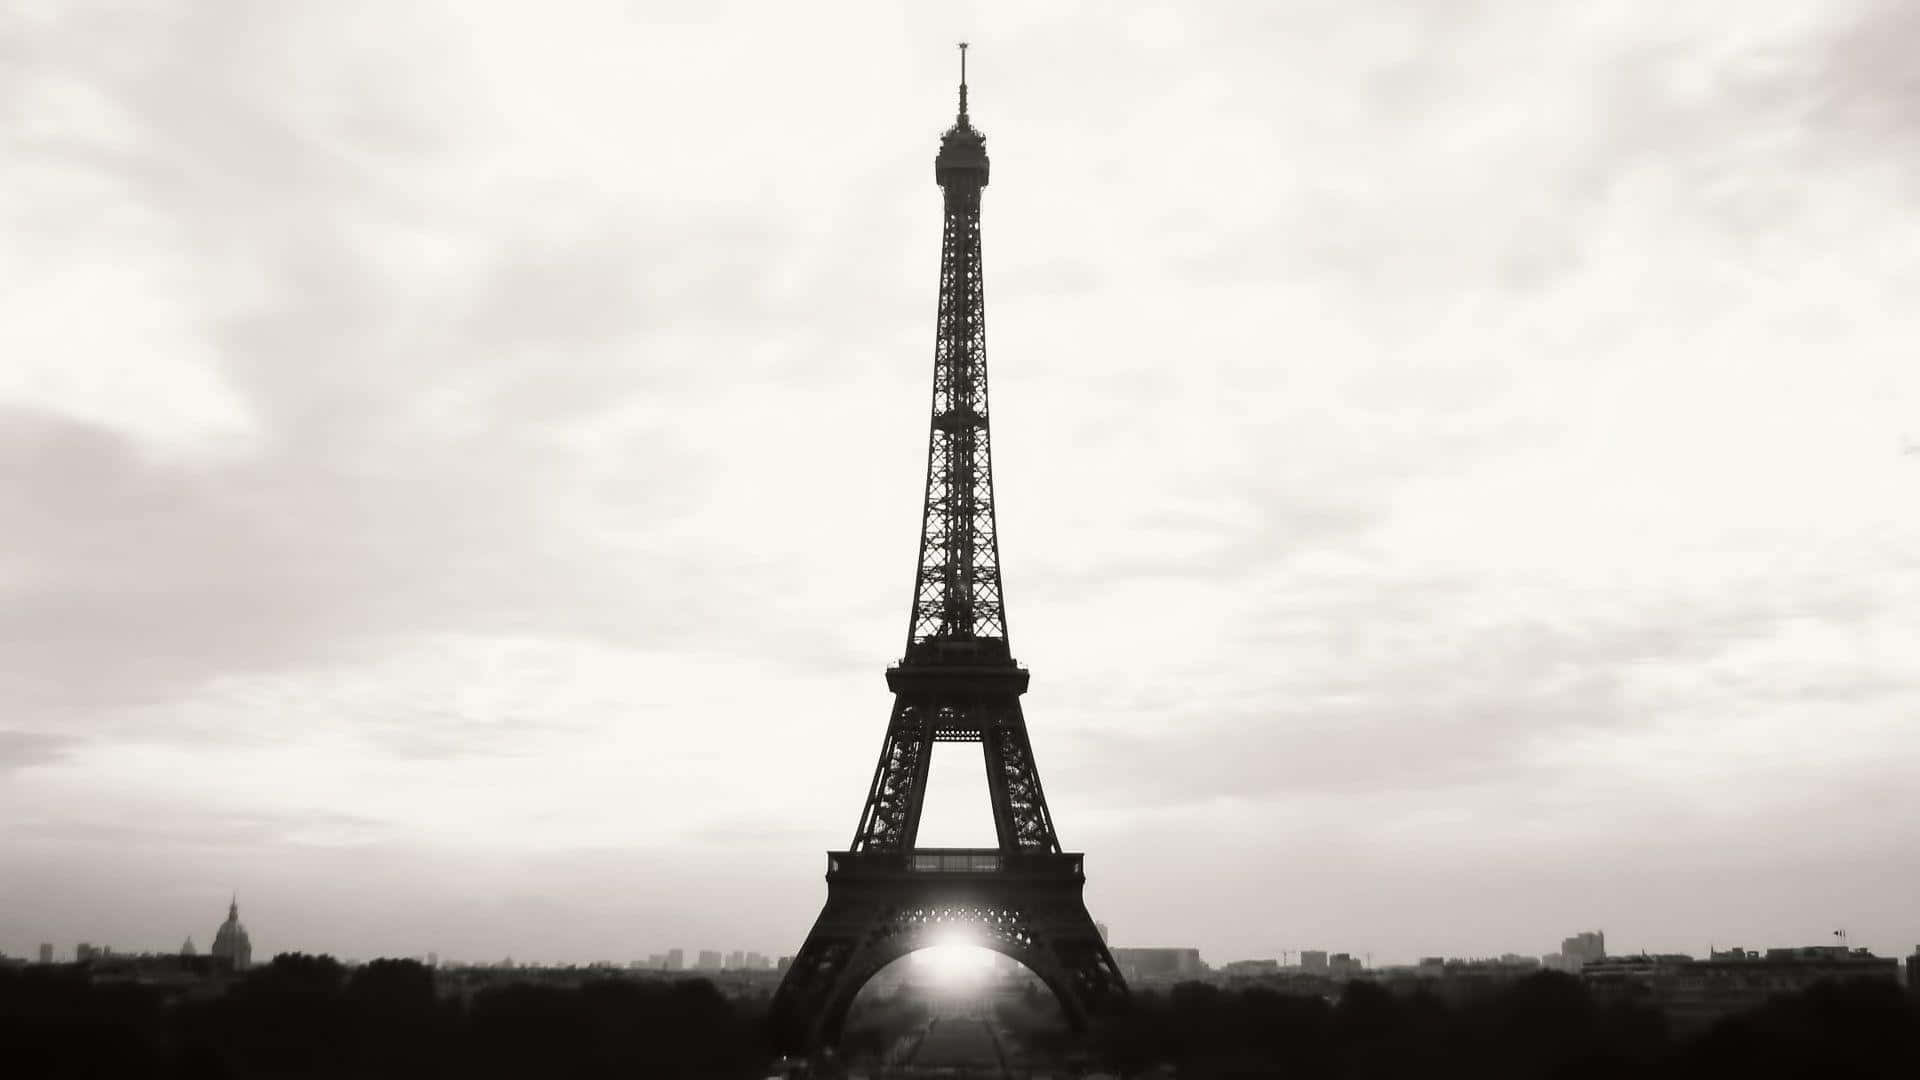 Take a Moment to Appreciate the Beauty of the Eiffel Tower